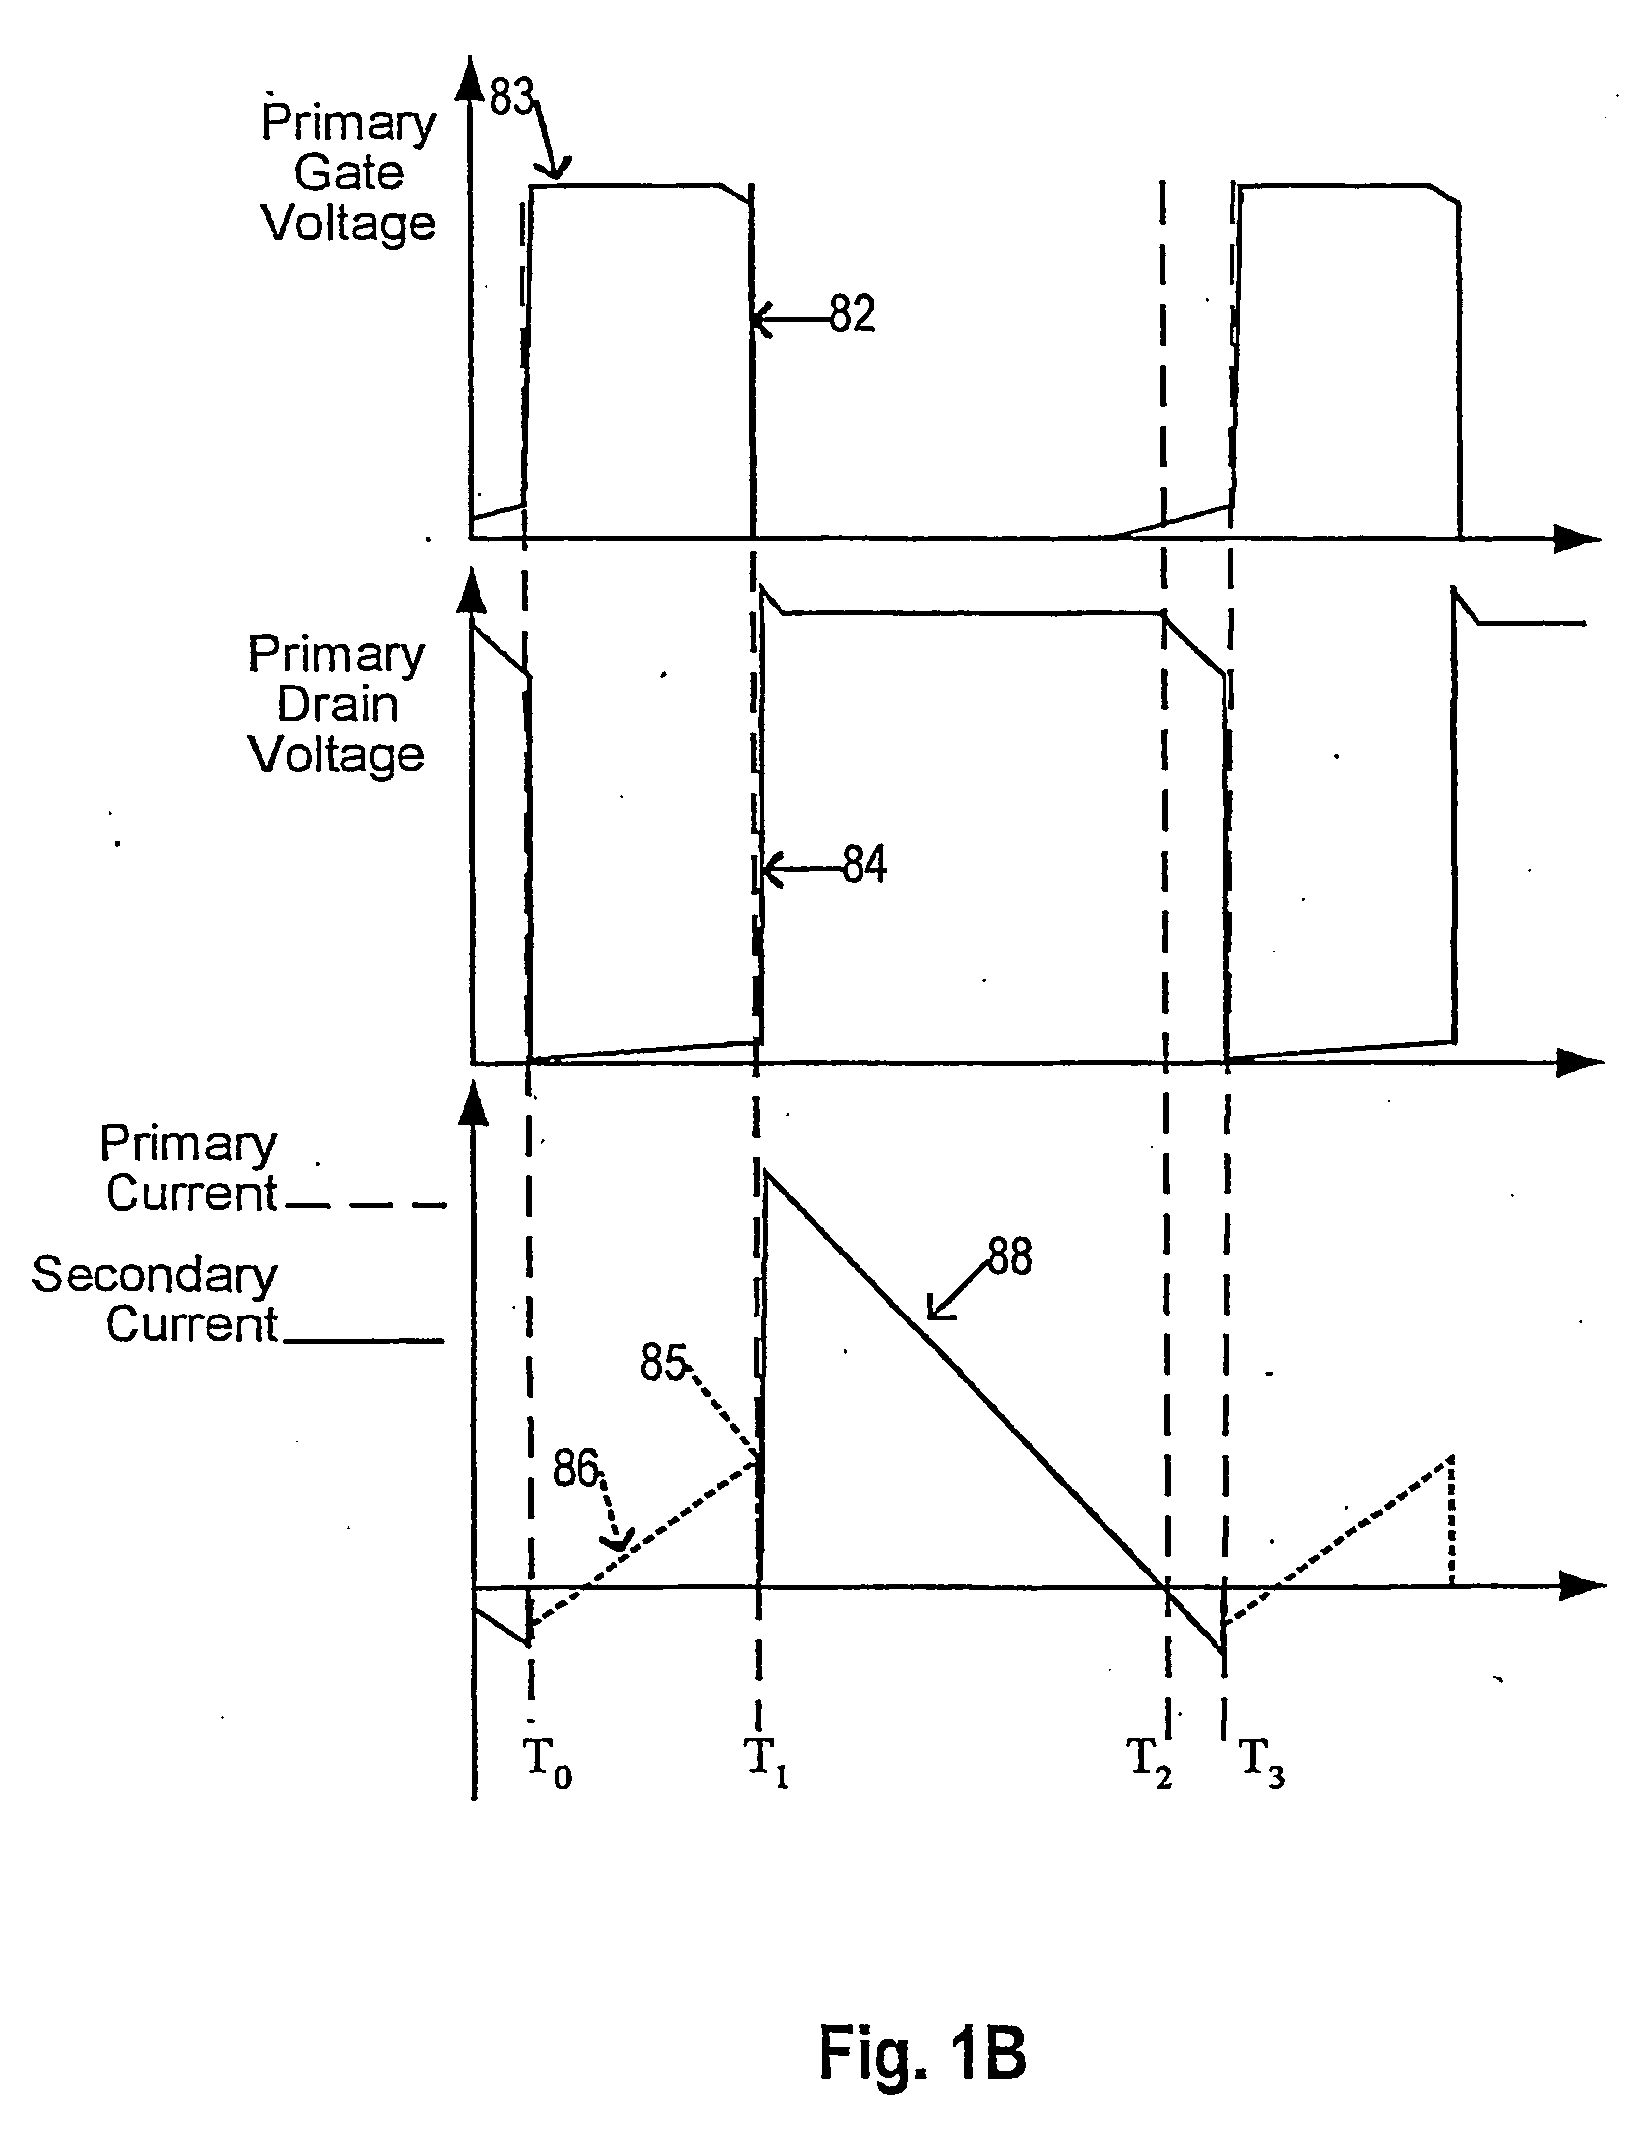 Soft switching high efficiency flyback converter